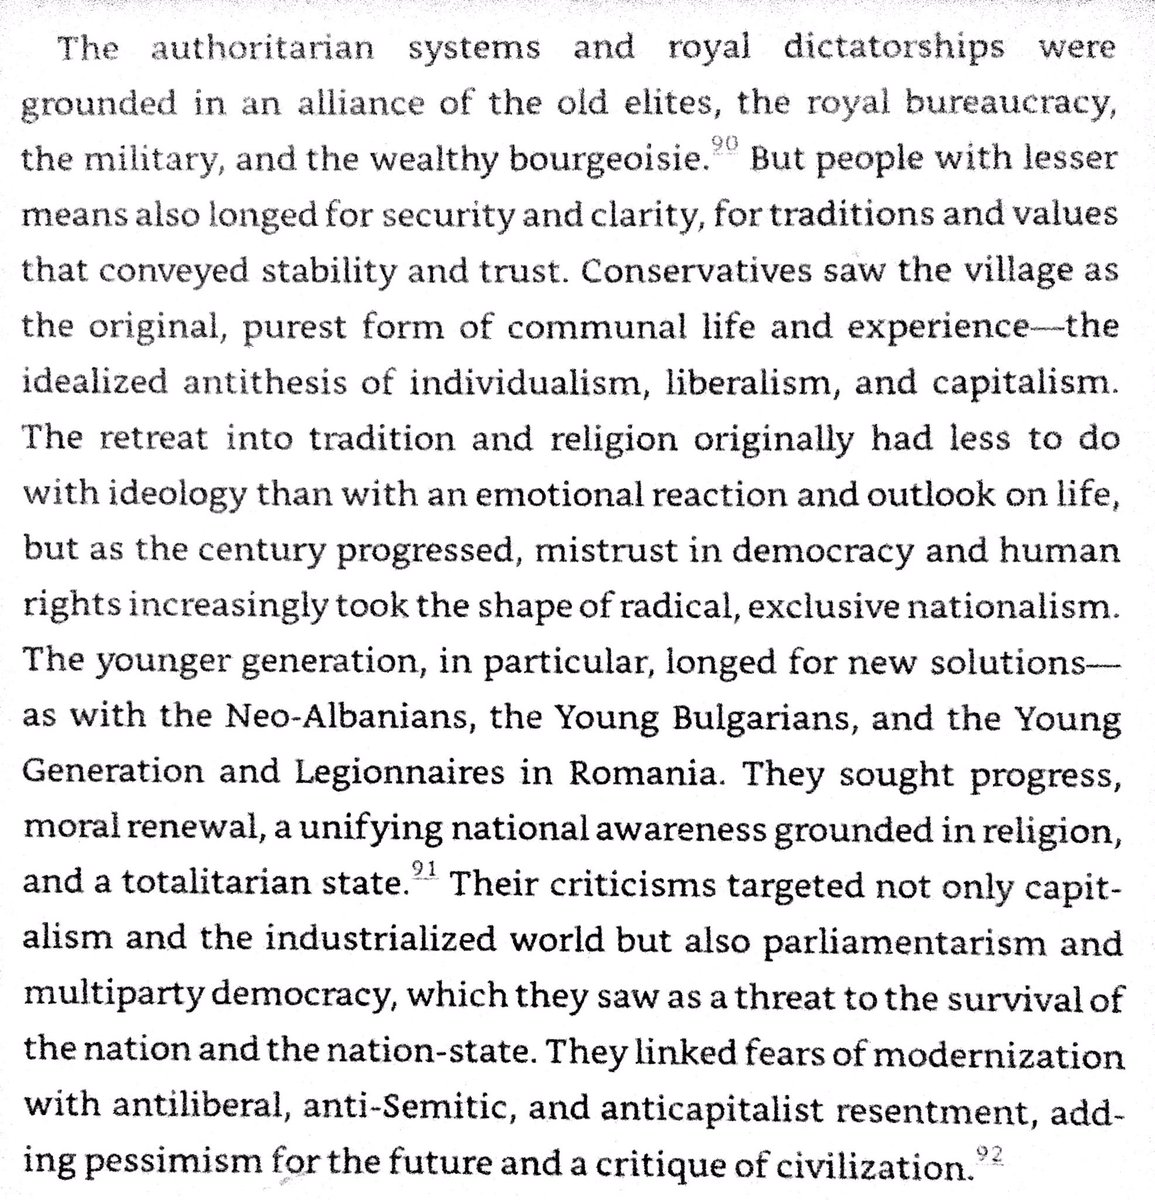 Authoritarian states of the interwar Balkans weren’t fascist, but conservative alliances of old elites, bourgeoisie, bureaucracy, & military. Romania & Croatia were the only two Balkan states with sizeable fascist movements.